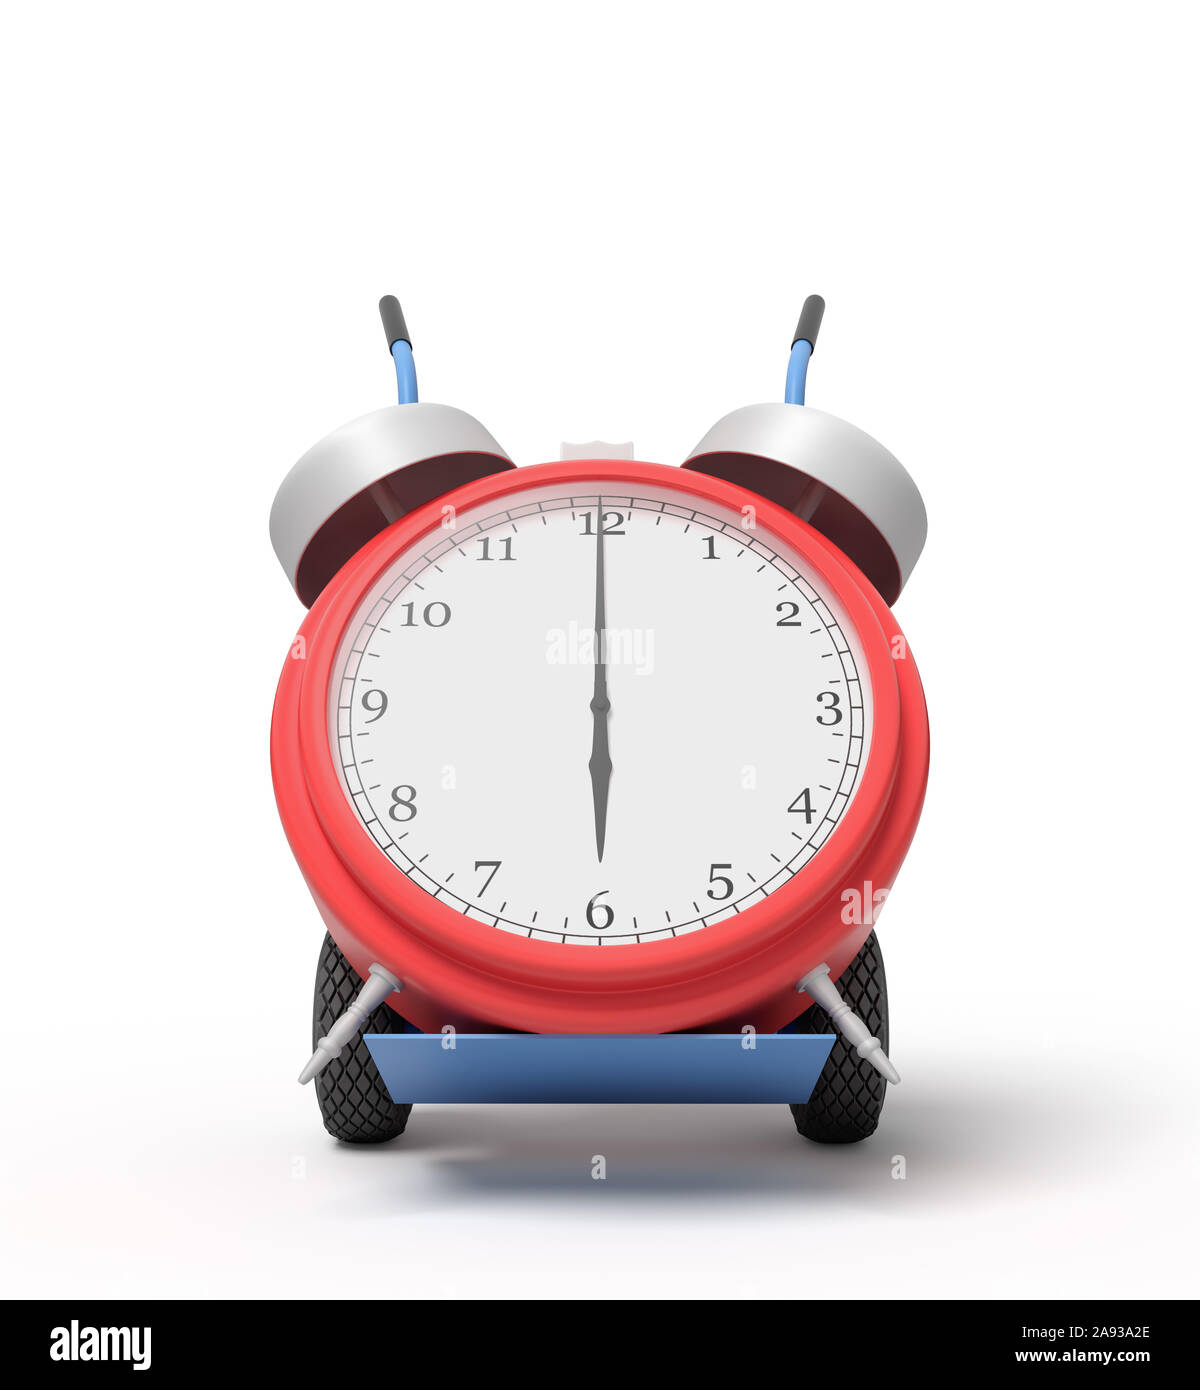 3d rendering of alarm clock on a hand truck Stock Photo